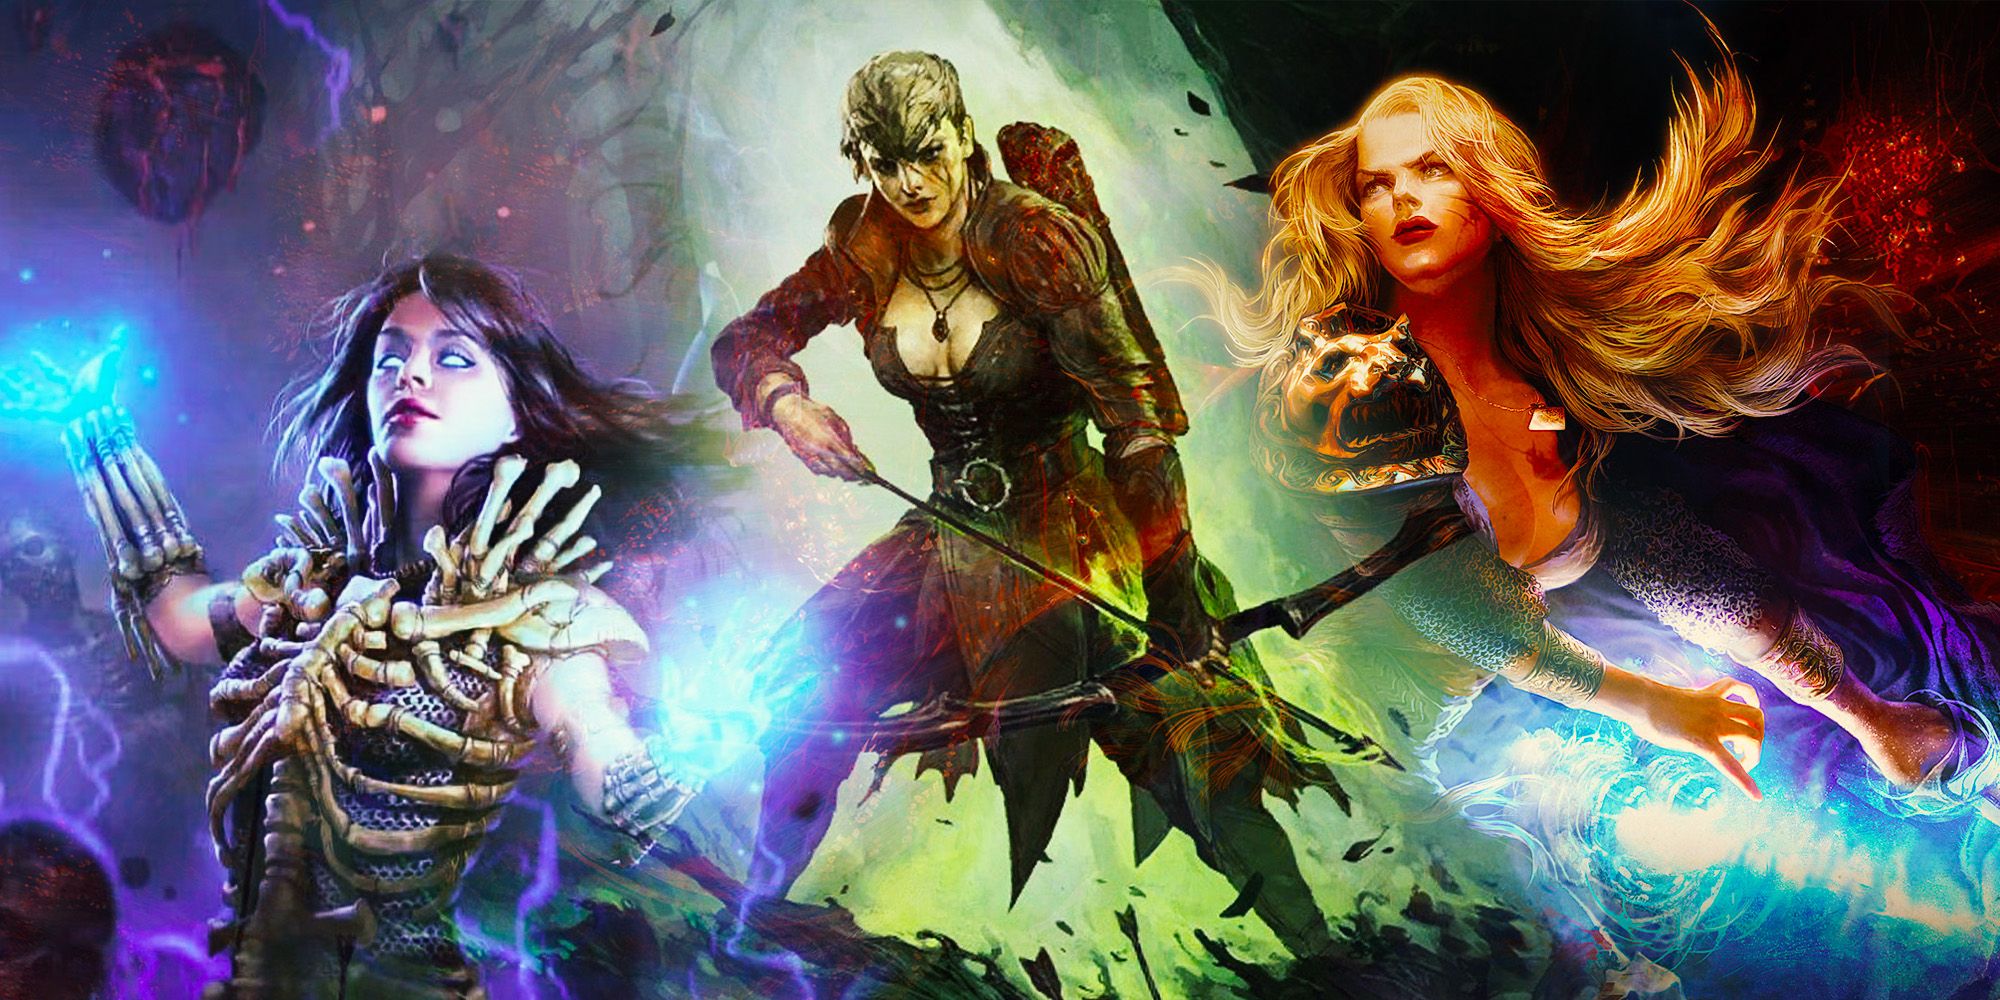 Ranger, Witch, and Scion from Path of Exile